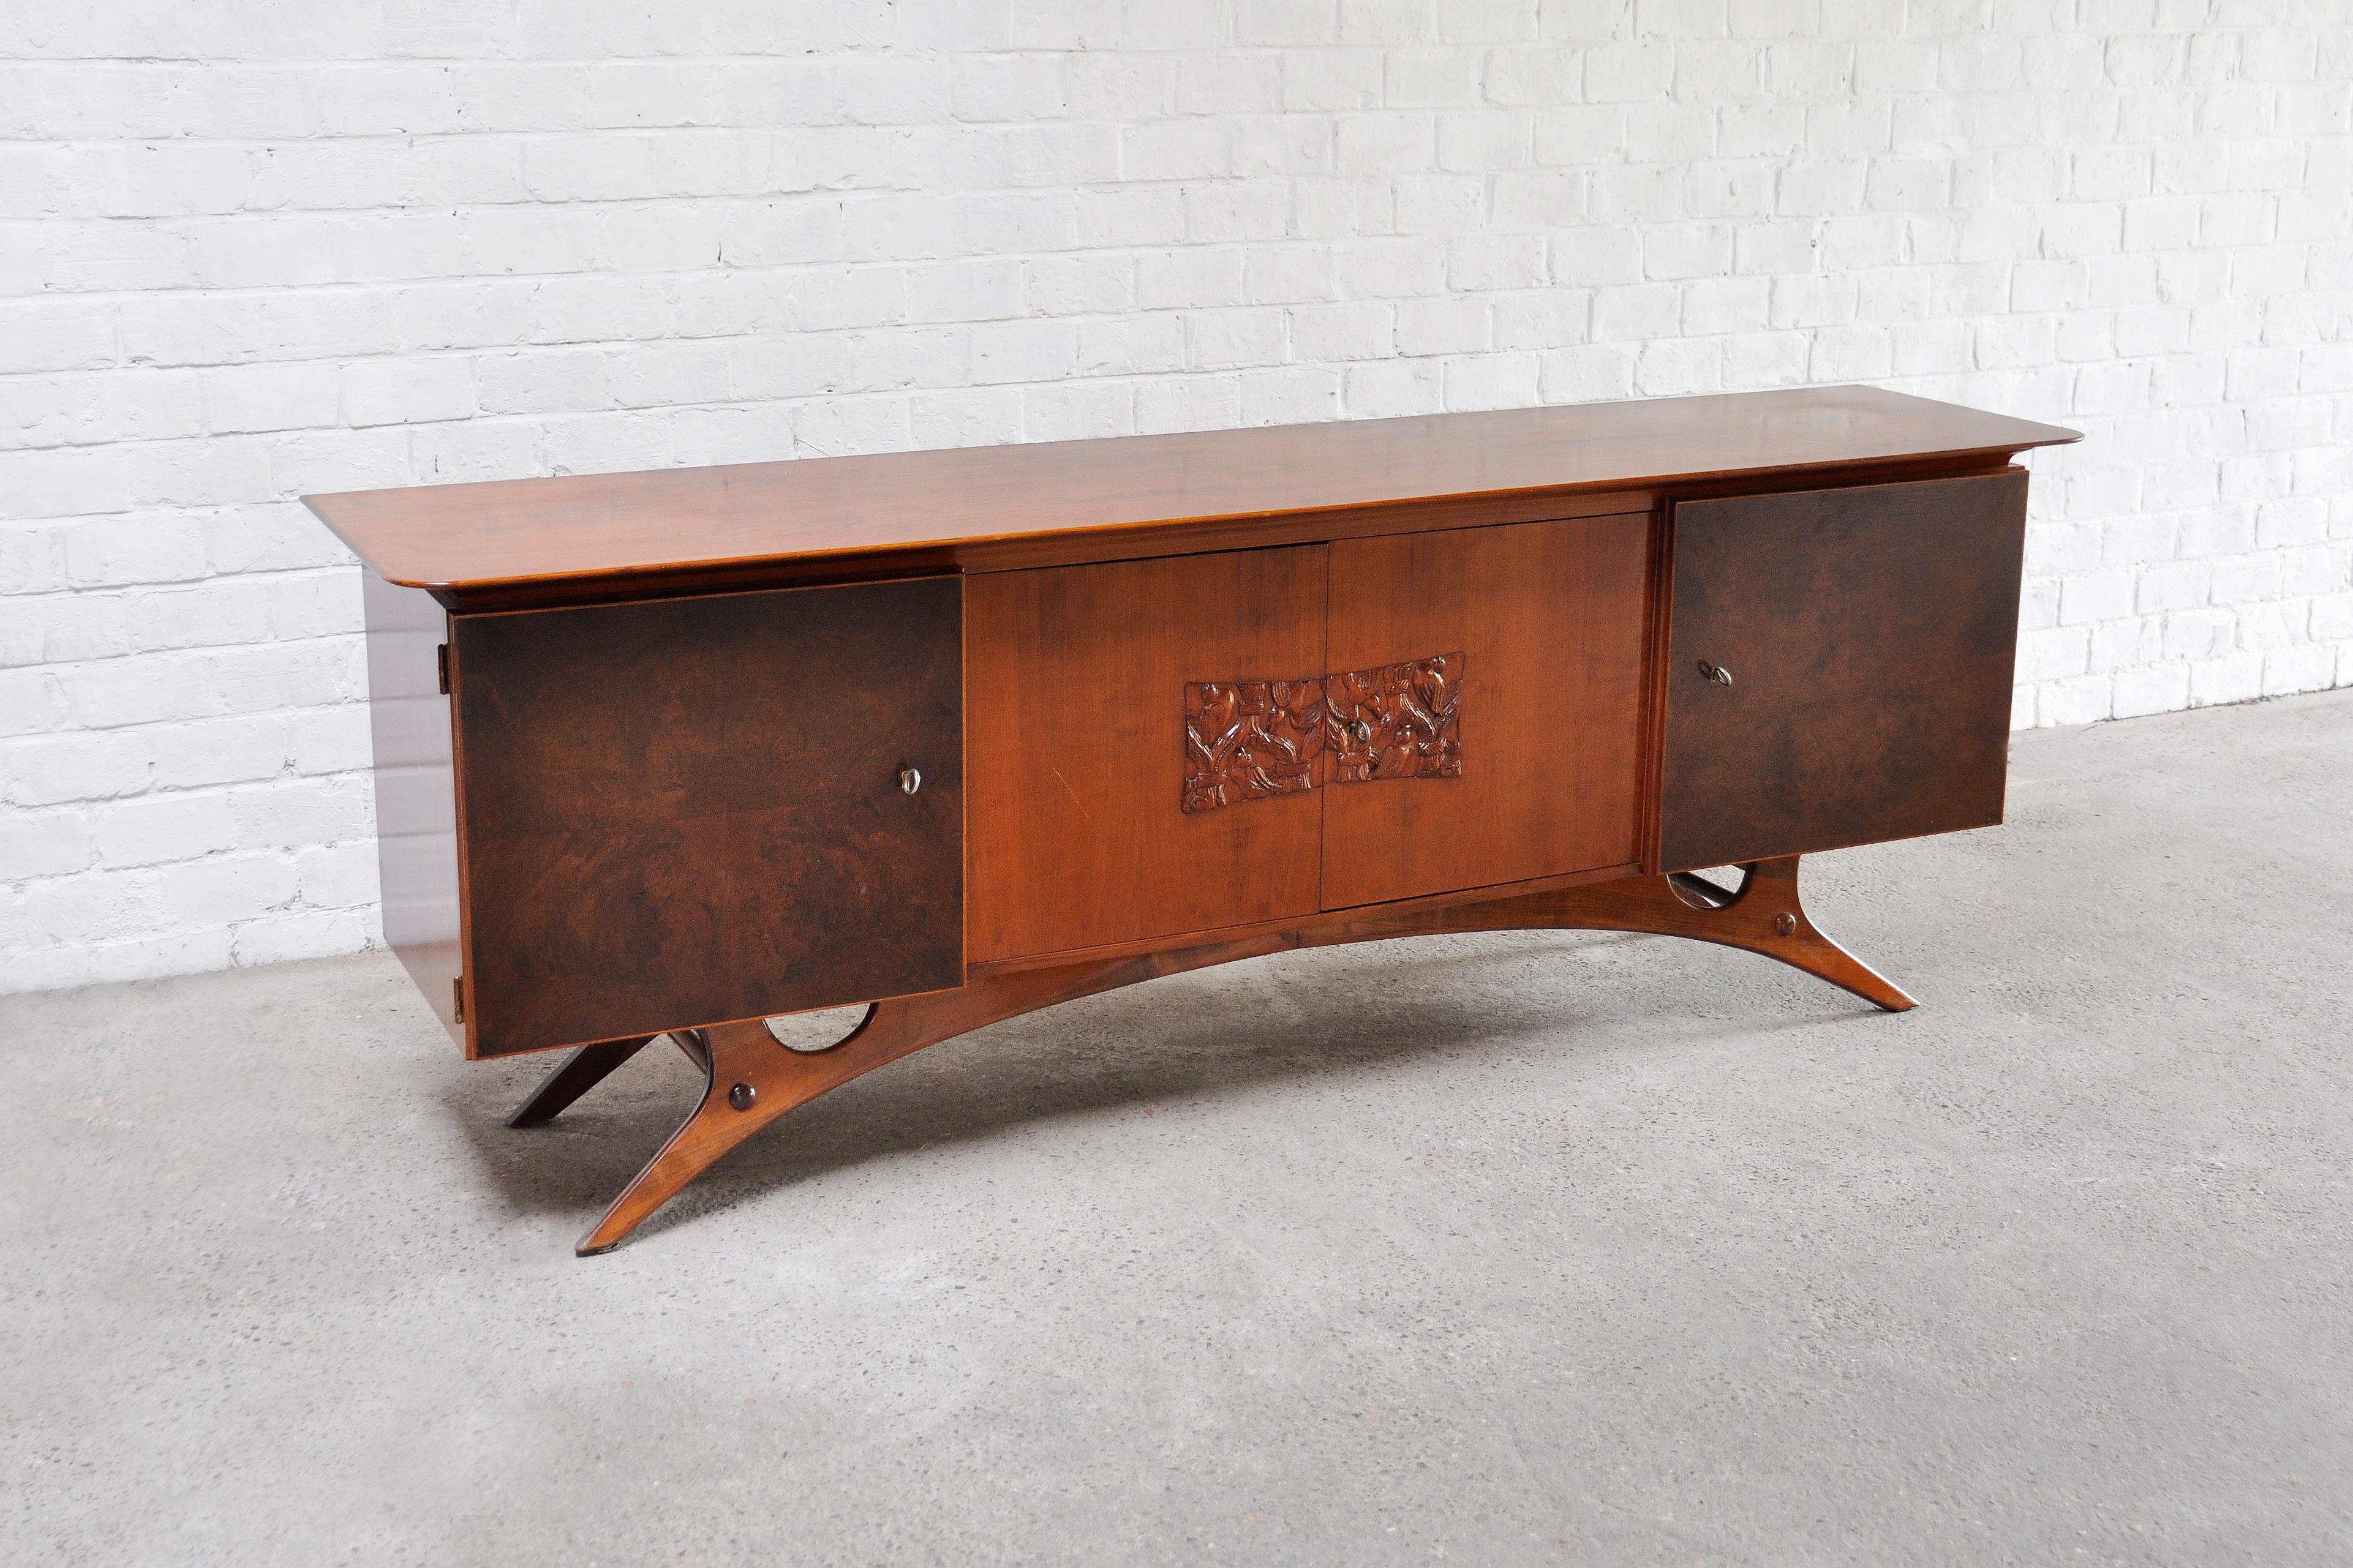 Italian Modernist Sideboard with Bas-Relief Carving, 1960's 1